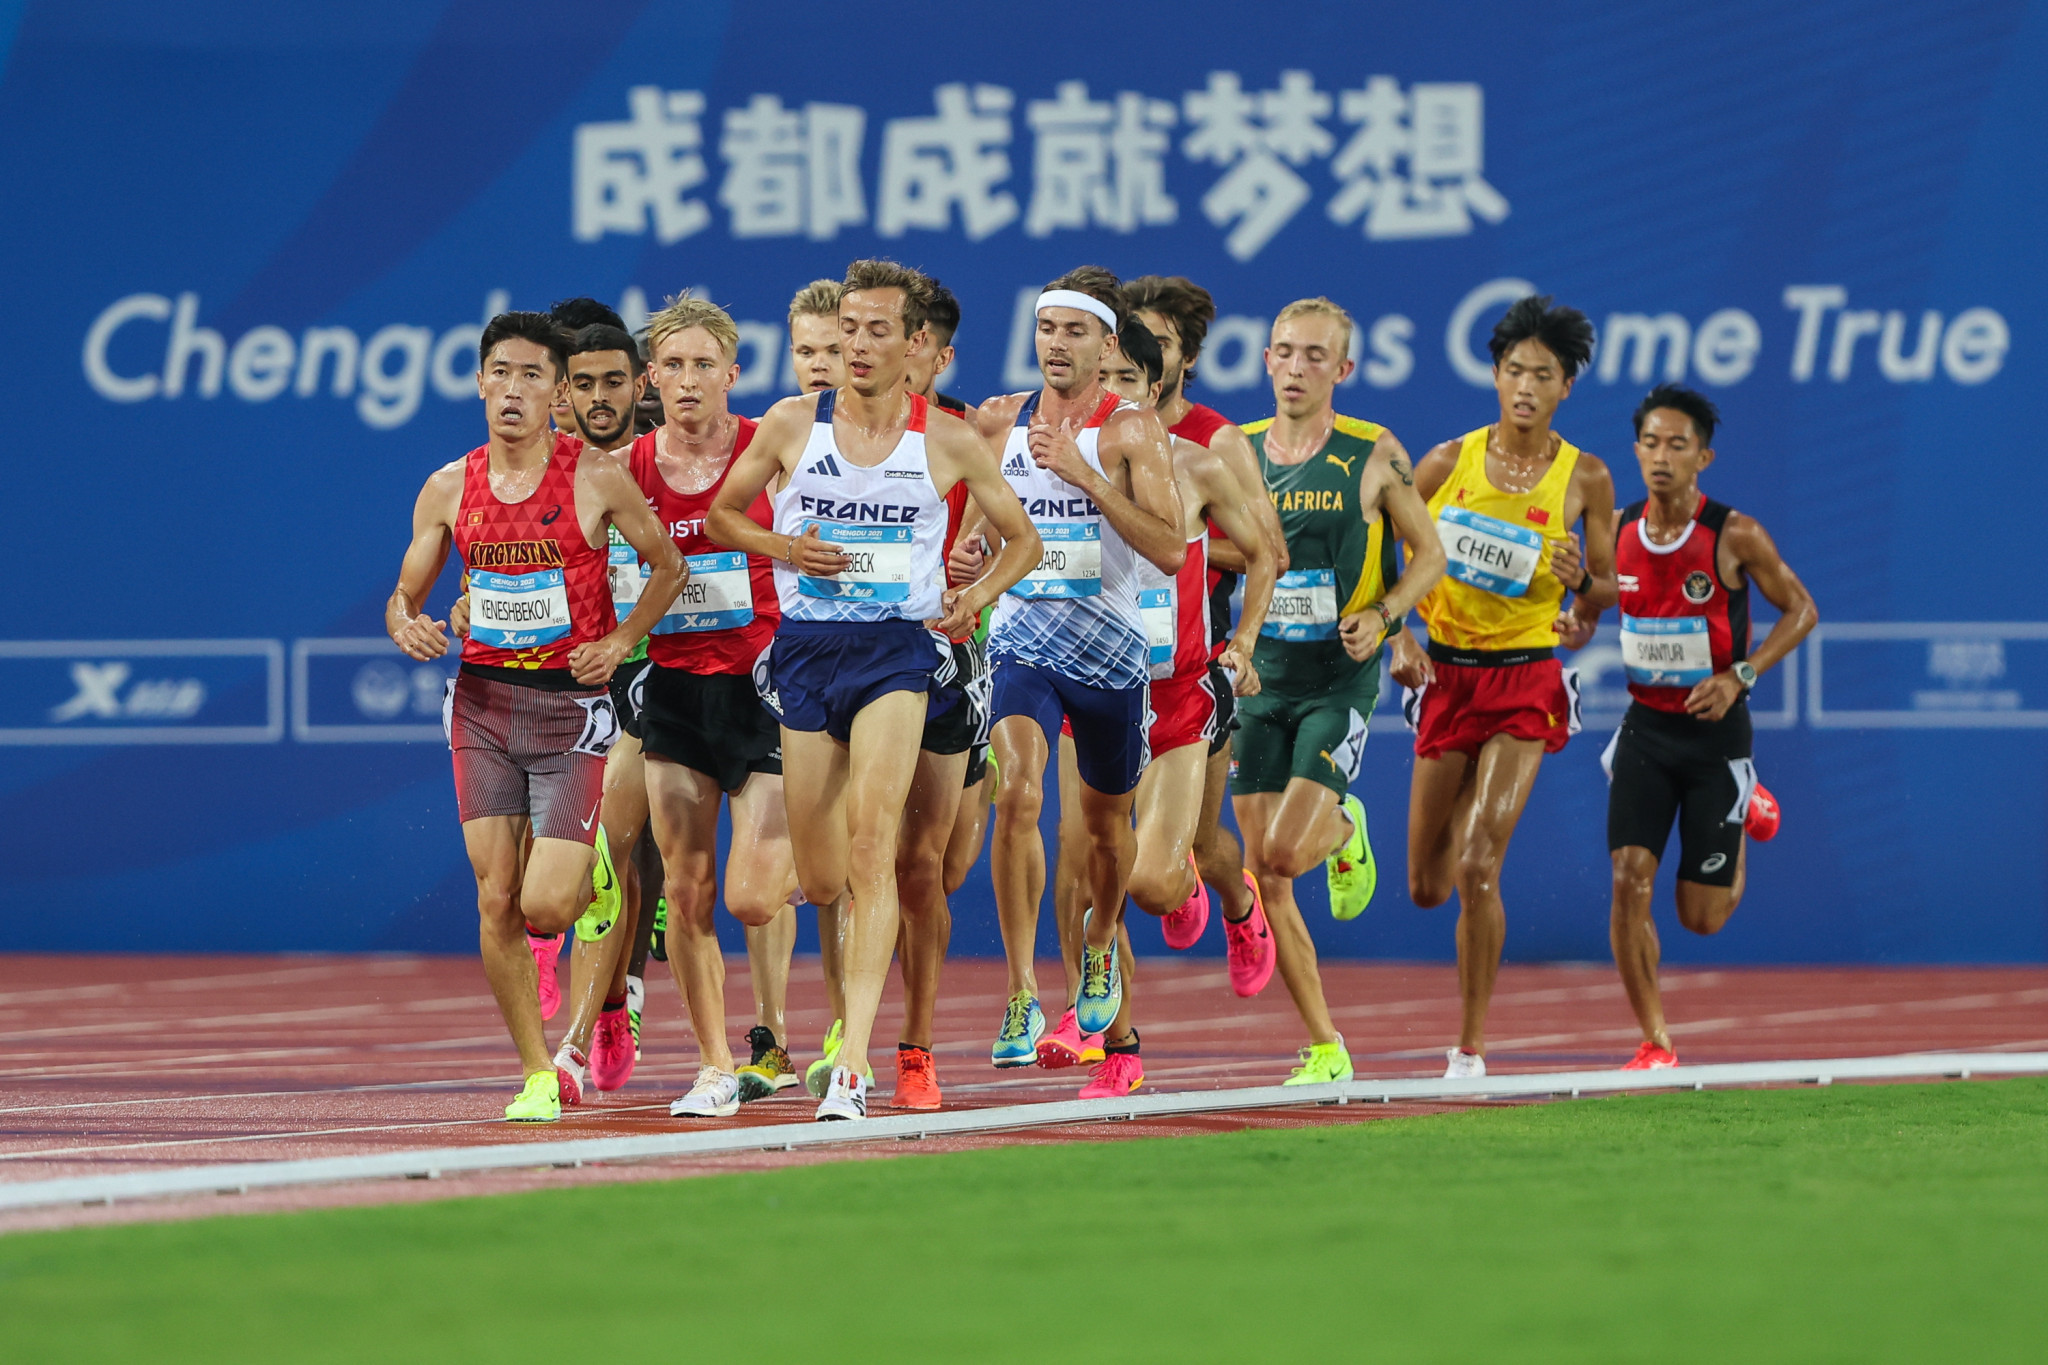 Action from the men’s 5,000 metres athletics final ©FISU